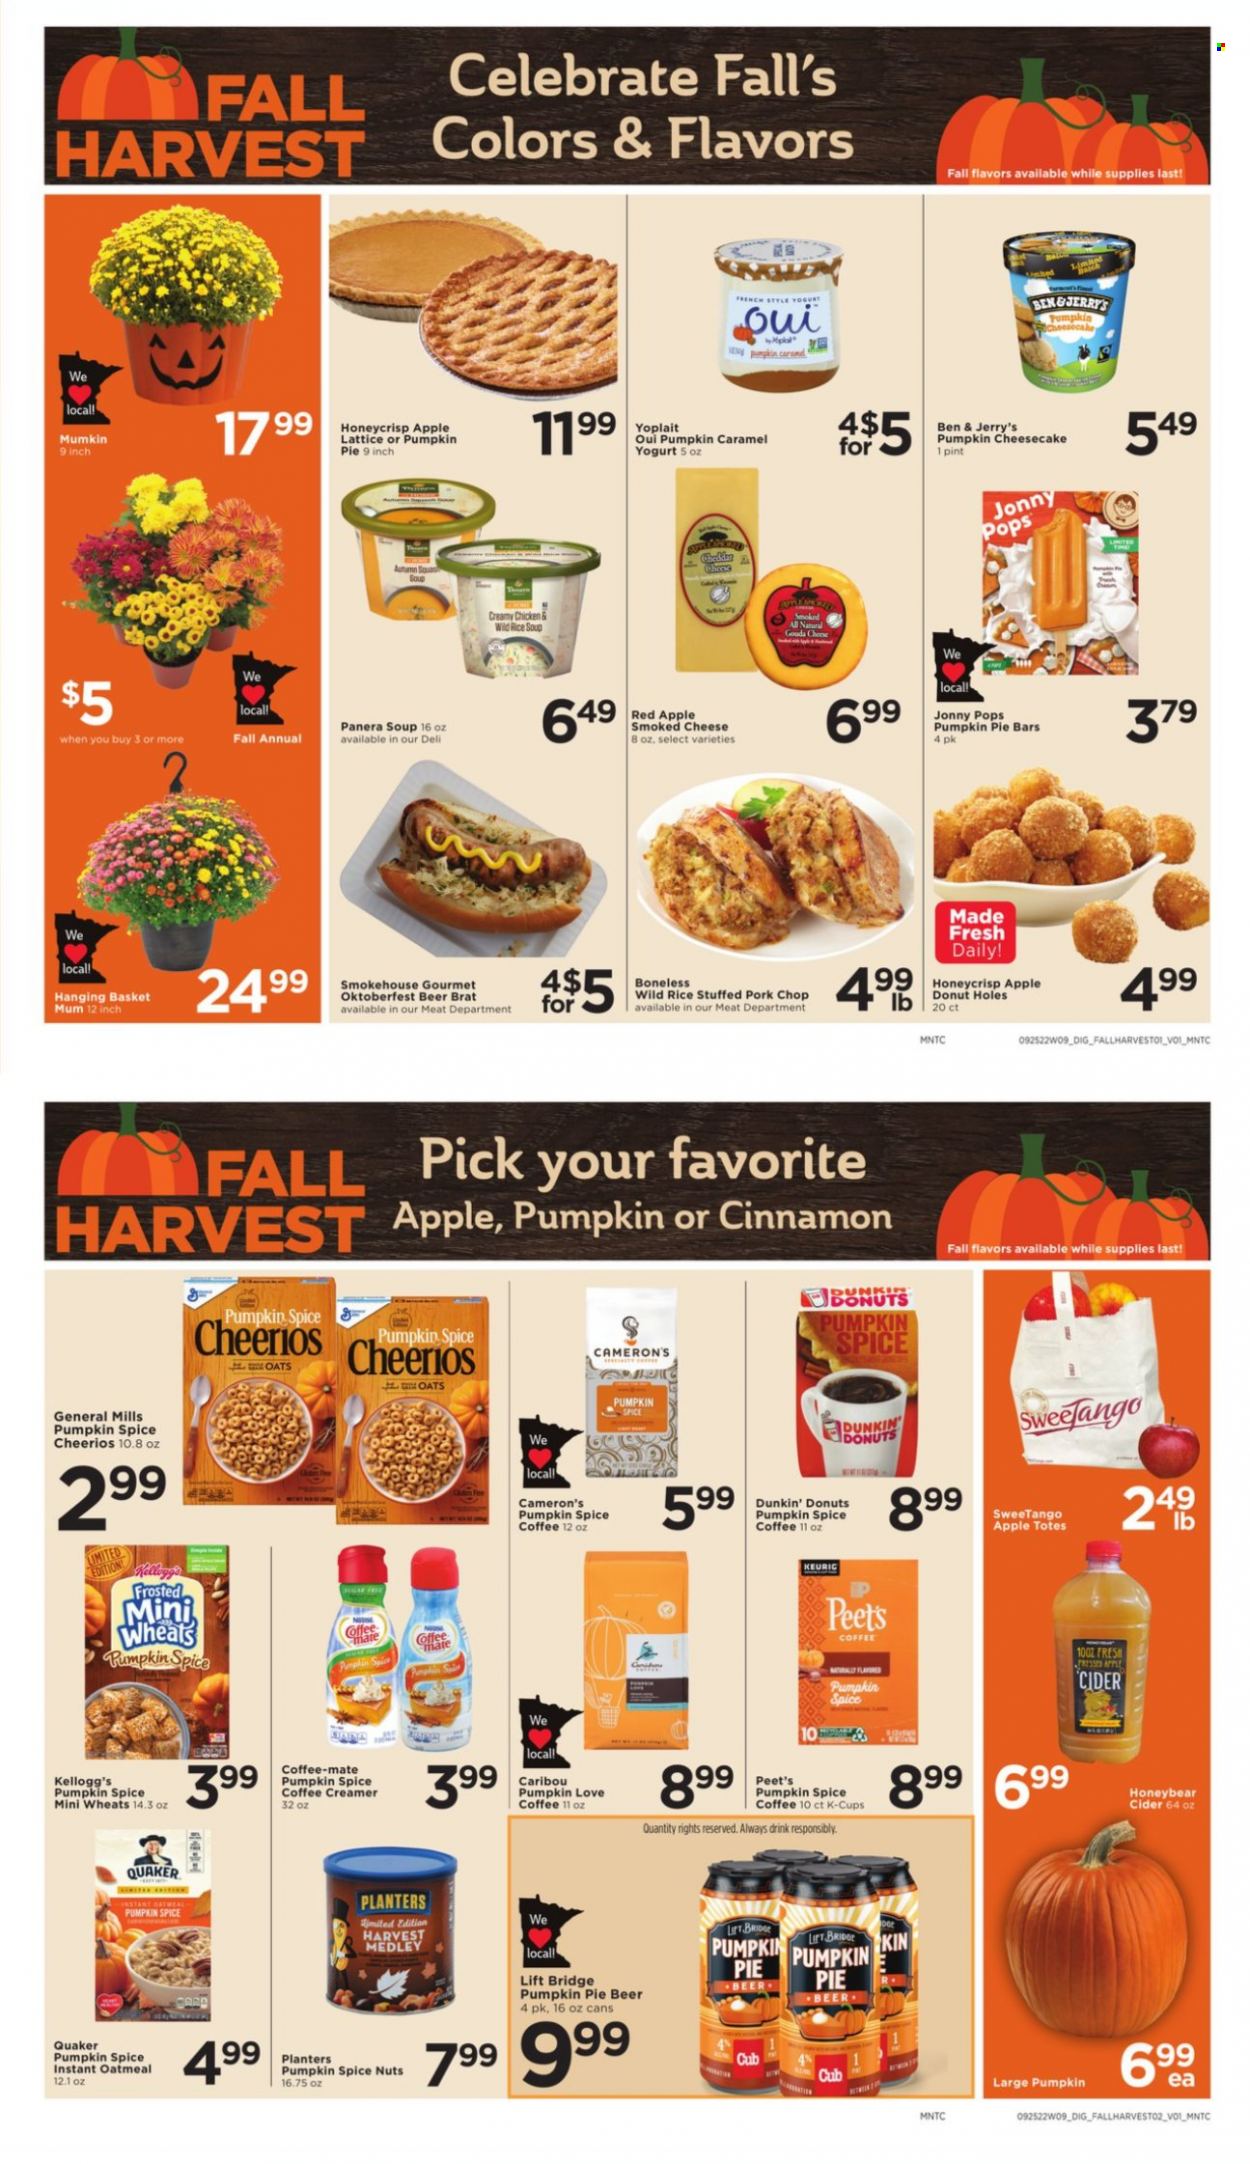 thumbnail - Cub Foods Flyer - 09/25/2022 - 10/01/2022 - Sales products - pie, donut holes, cheesecake, Dunkin' Donuts, soup, Quaker, cheddar, cheese, yoghurt, Yoplait, Coffee-Mate, creamer, Ben & Jerry's, Kellogg's, oatmeal, oats, Cheerios, spice, cinnamon, caramel, Planters, coffee capsules, K-Cups, Keurig, apple cider, cider, beer, pork chops, pork meat, Mum. Page 6.